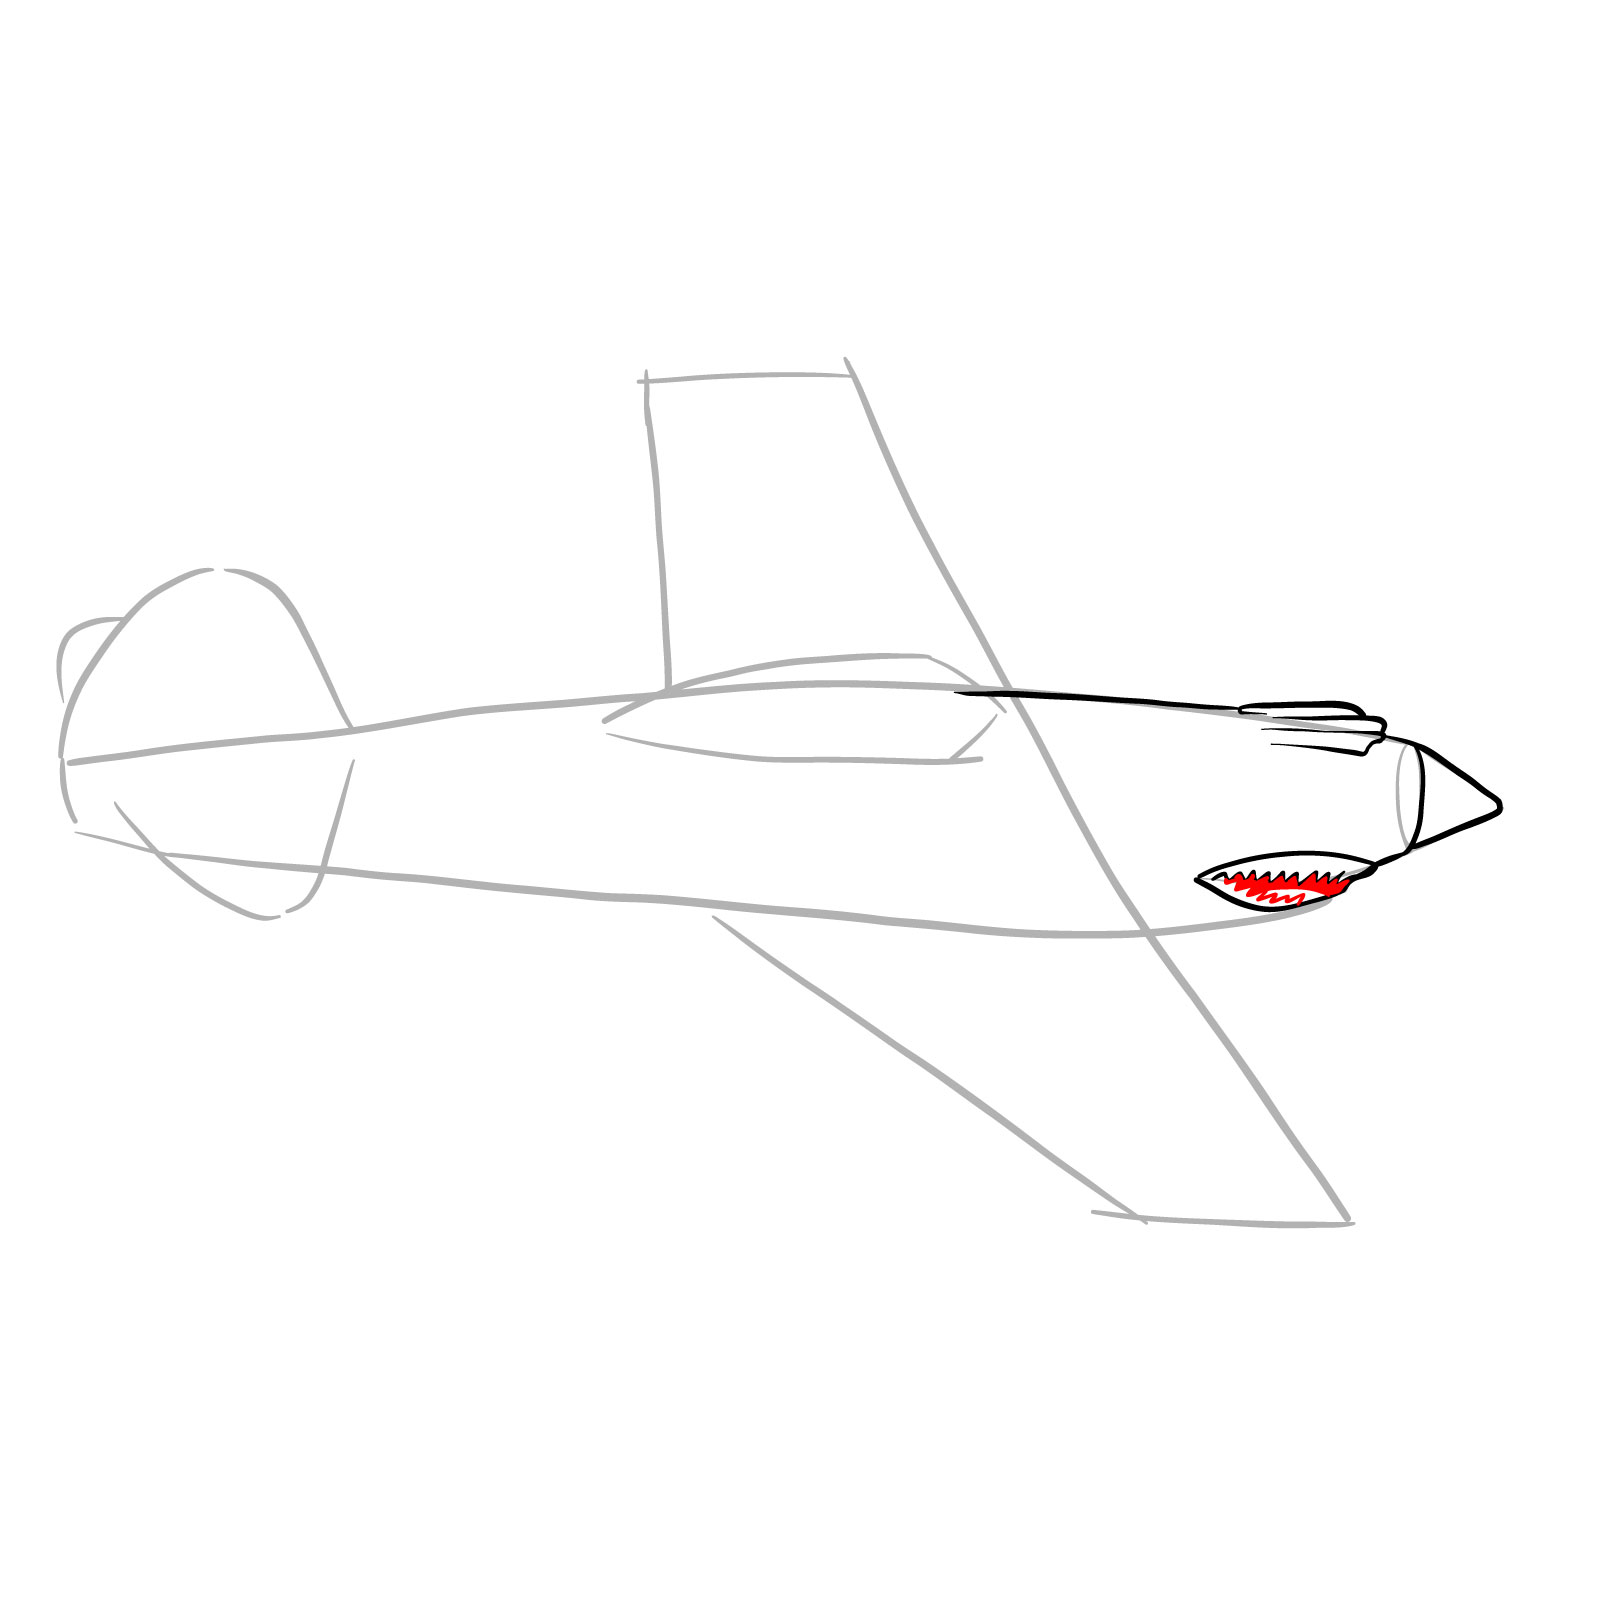 How to draw a P-40 Flying Tiger - step 08